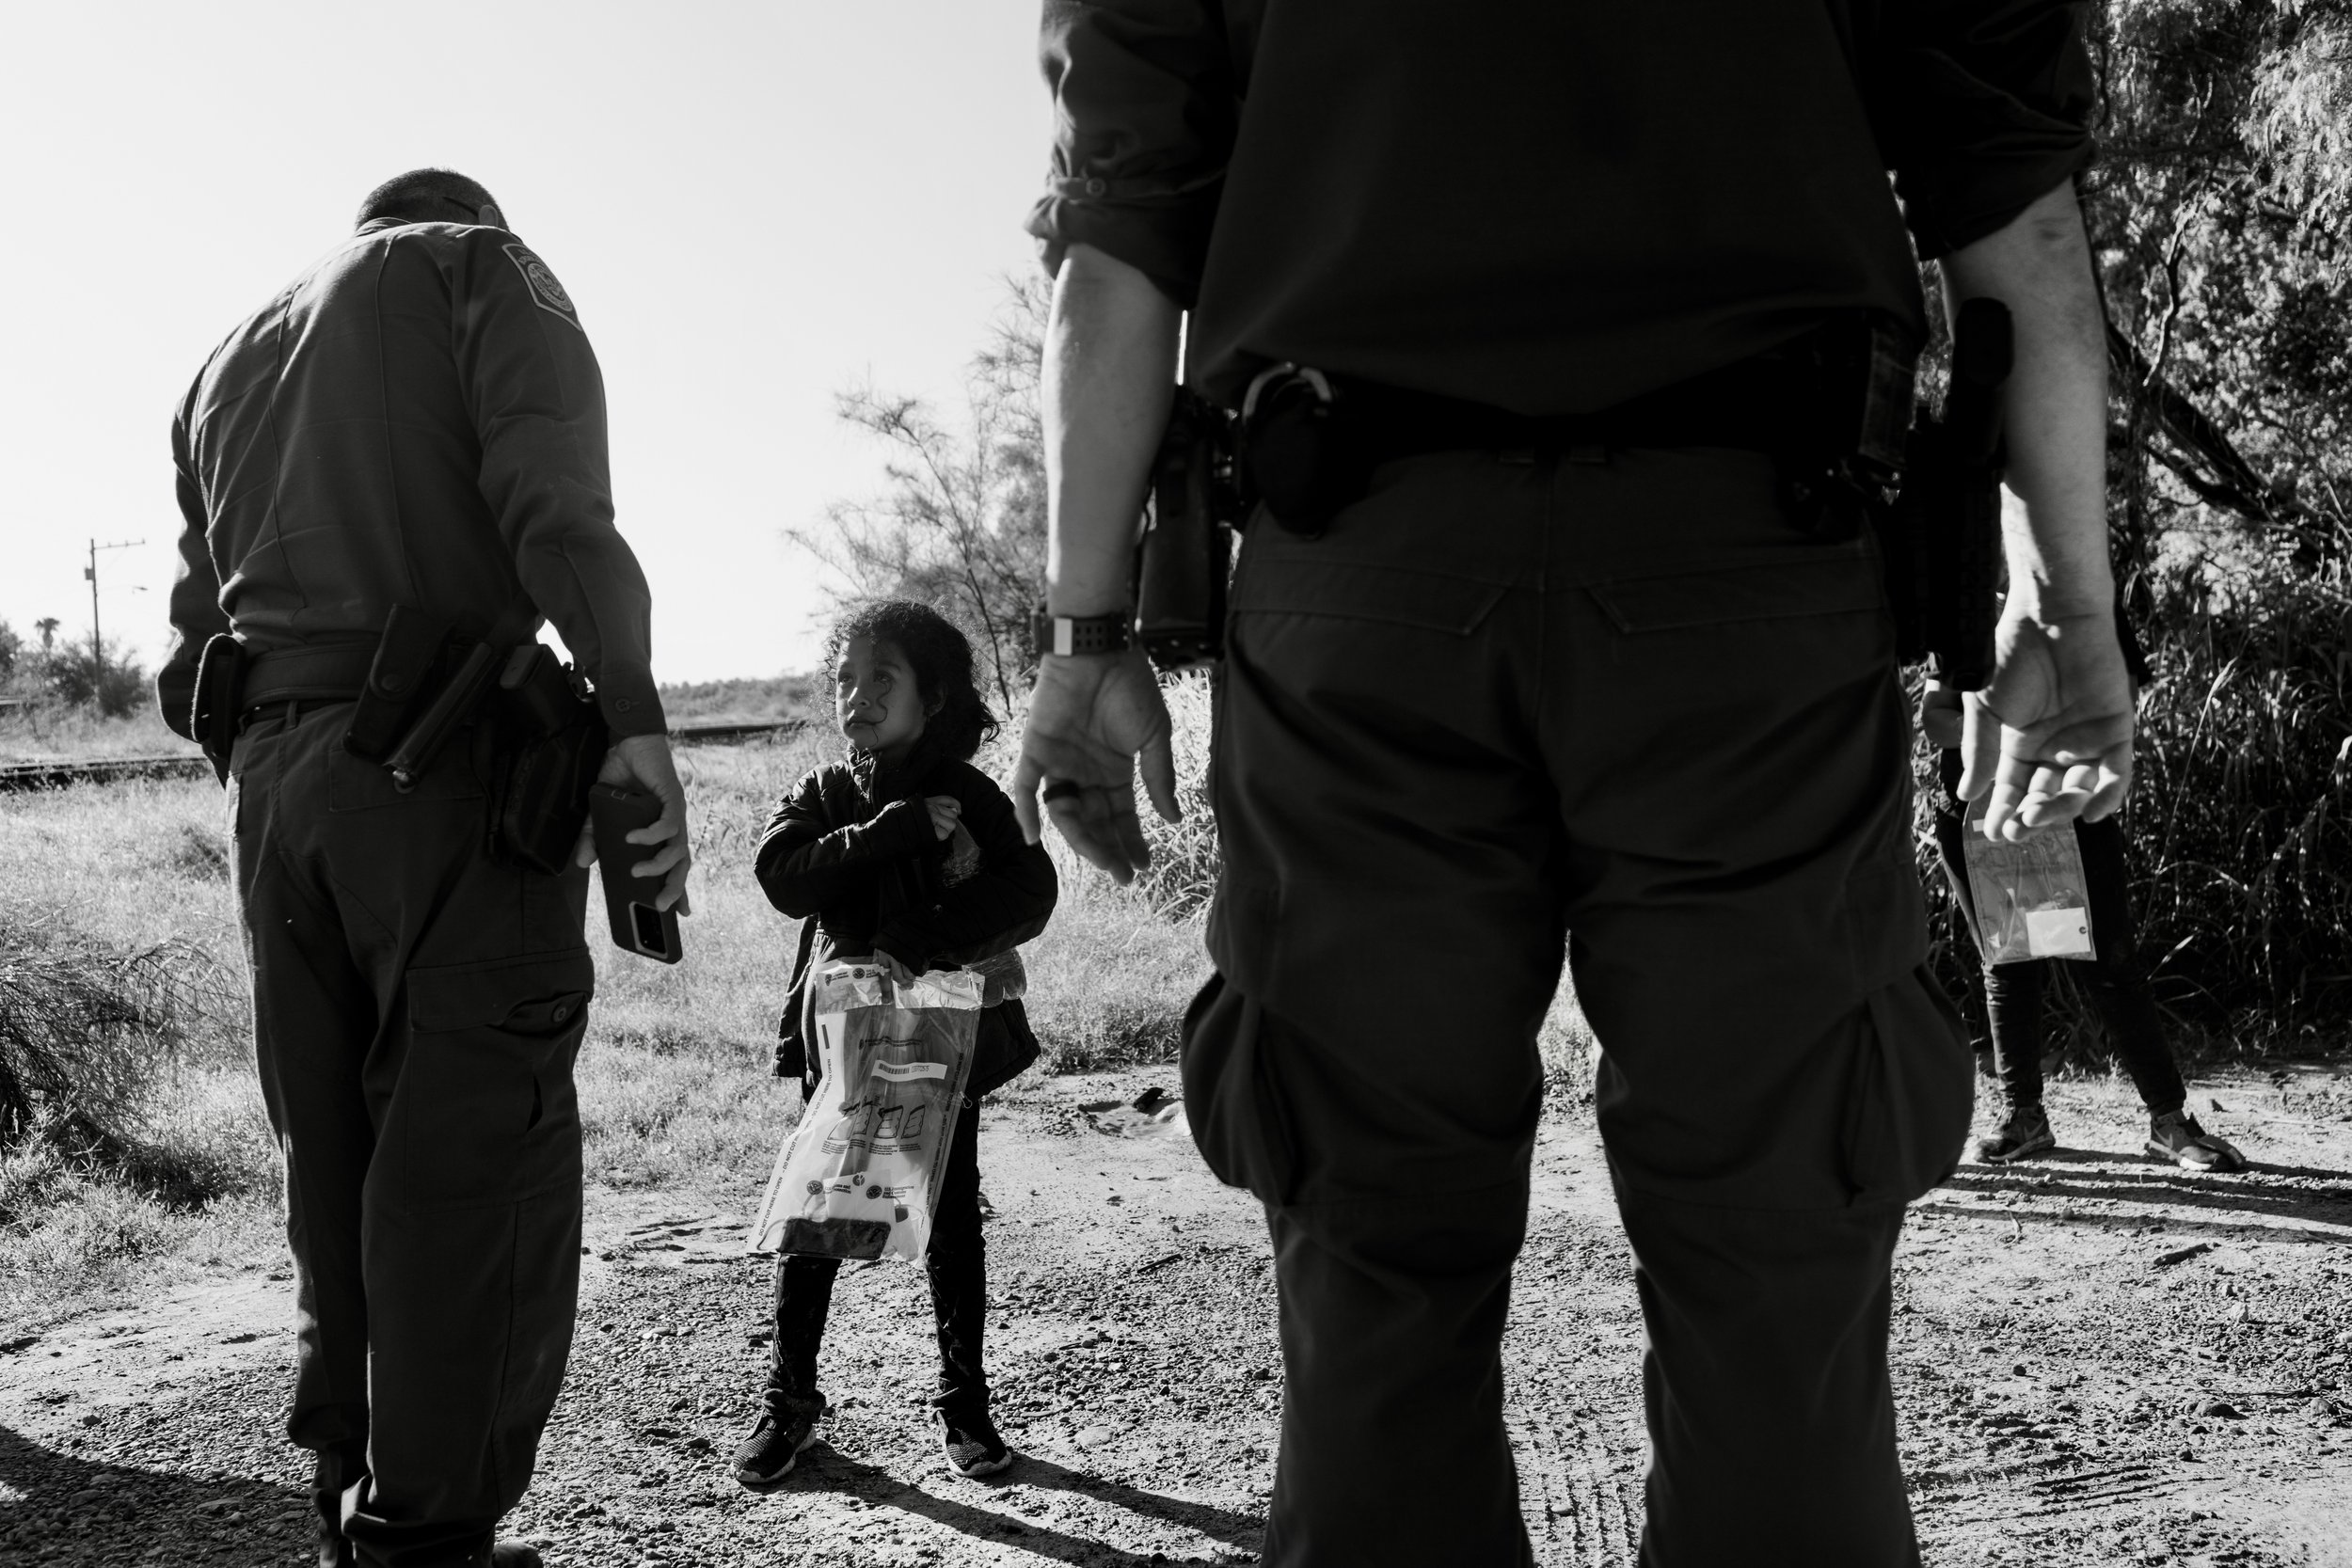  A young unaccompanied minor looks up defiantly at Border Patrol after arriving on American soil in La Joya, Texas. 